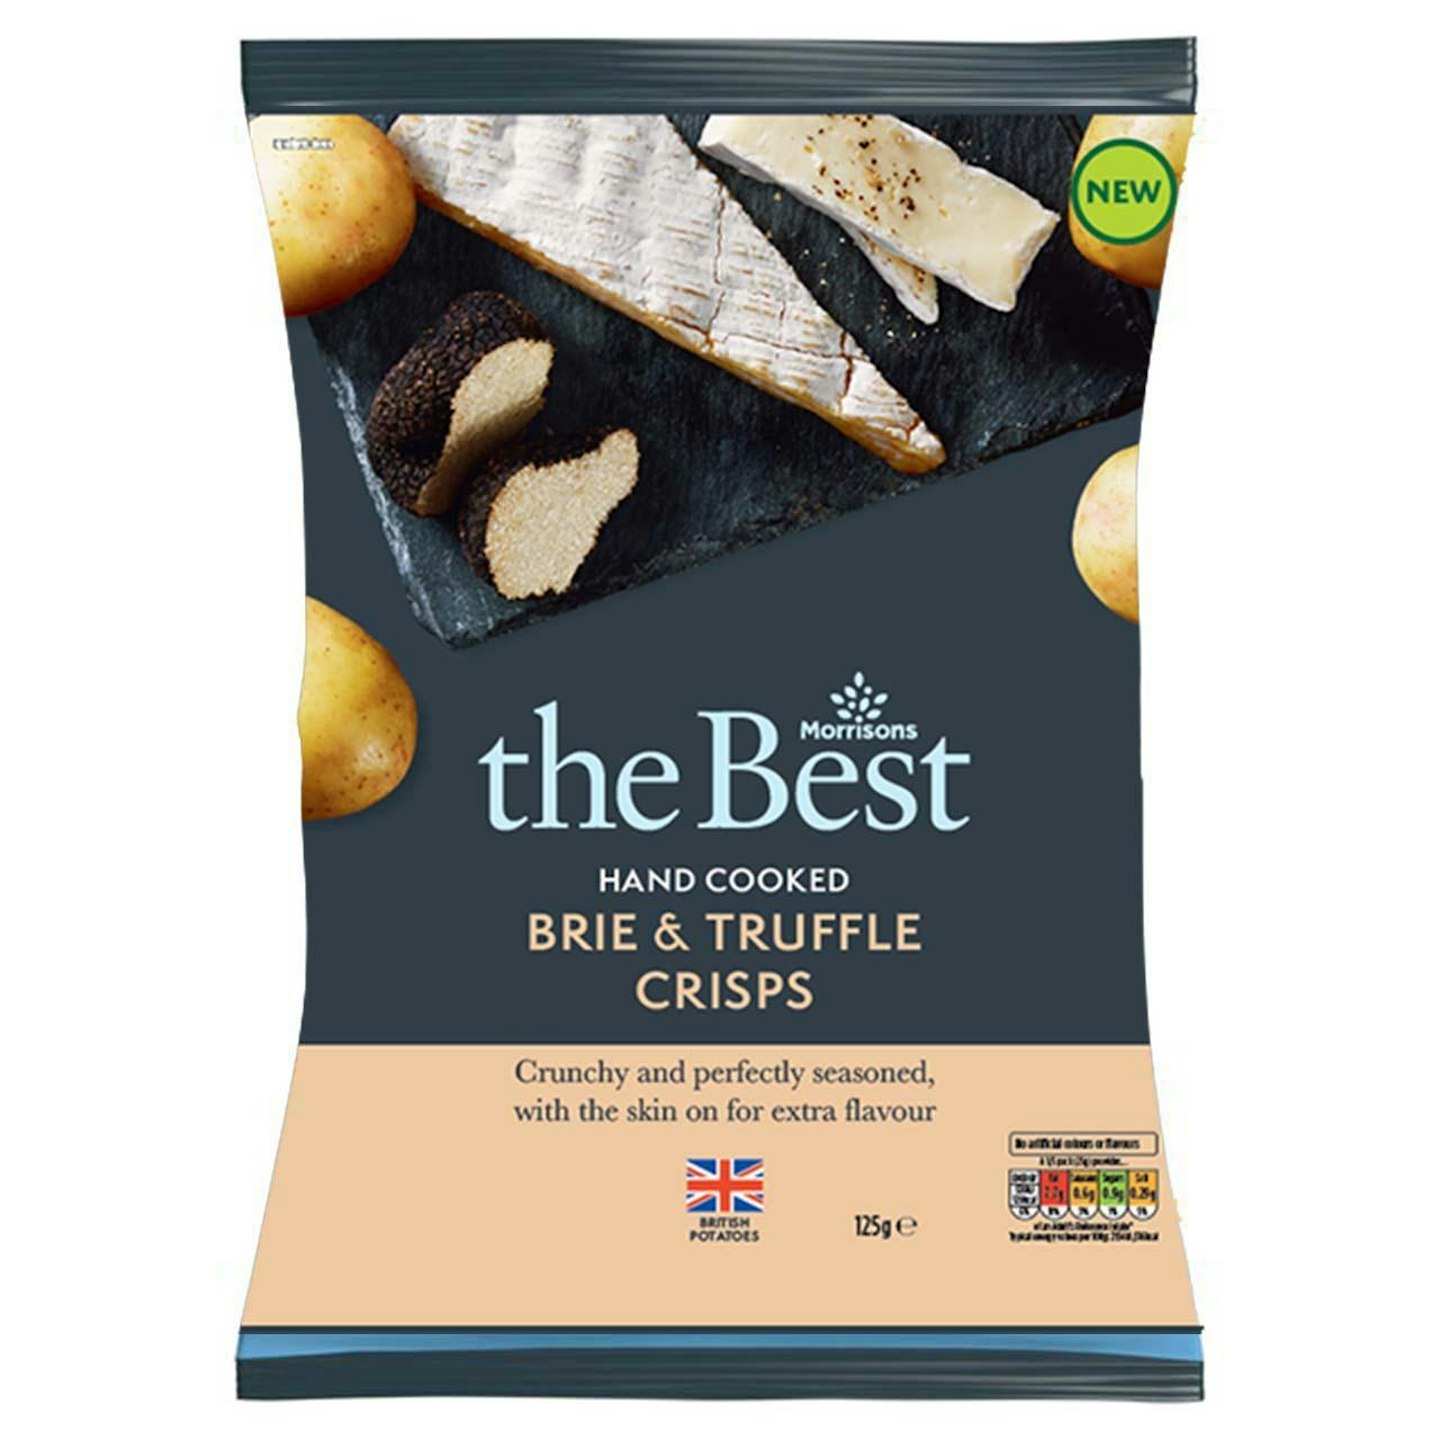 Morrisons The Best Brie And Truffle Crisps, £1.09